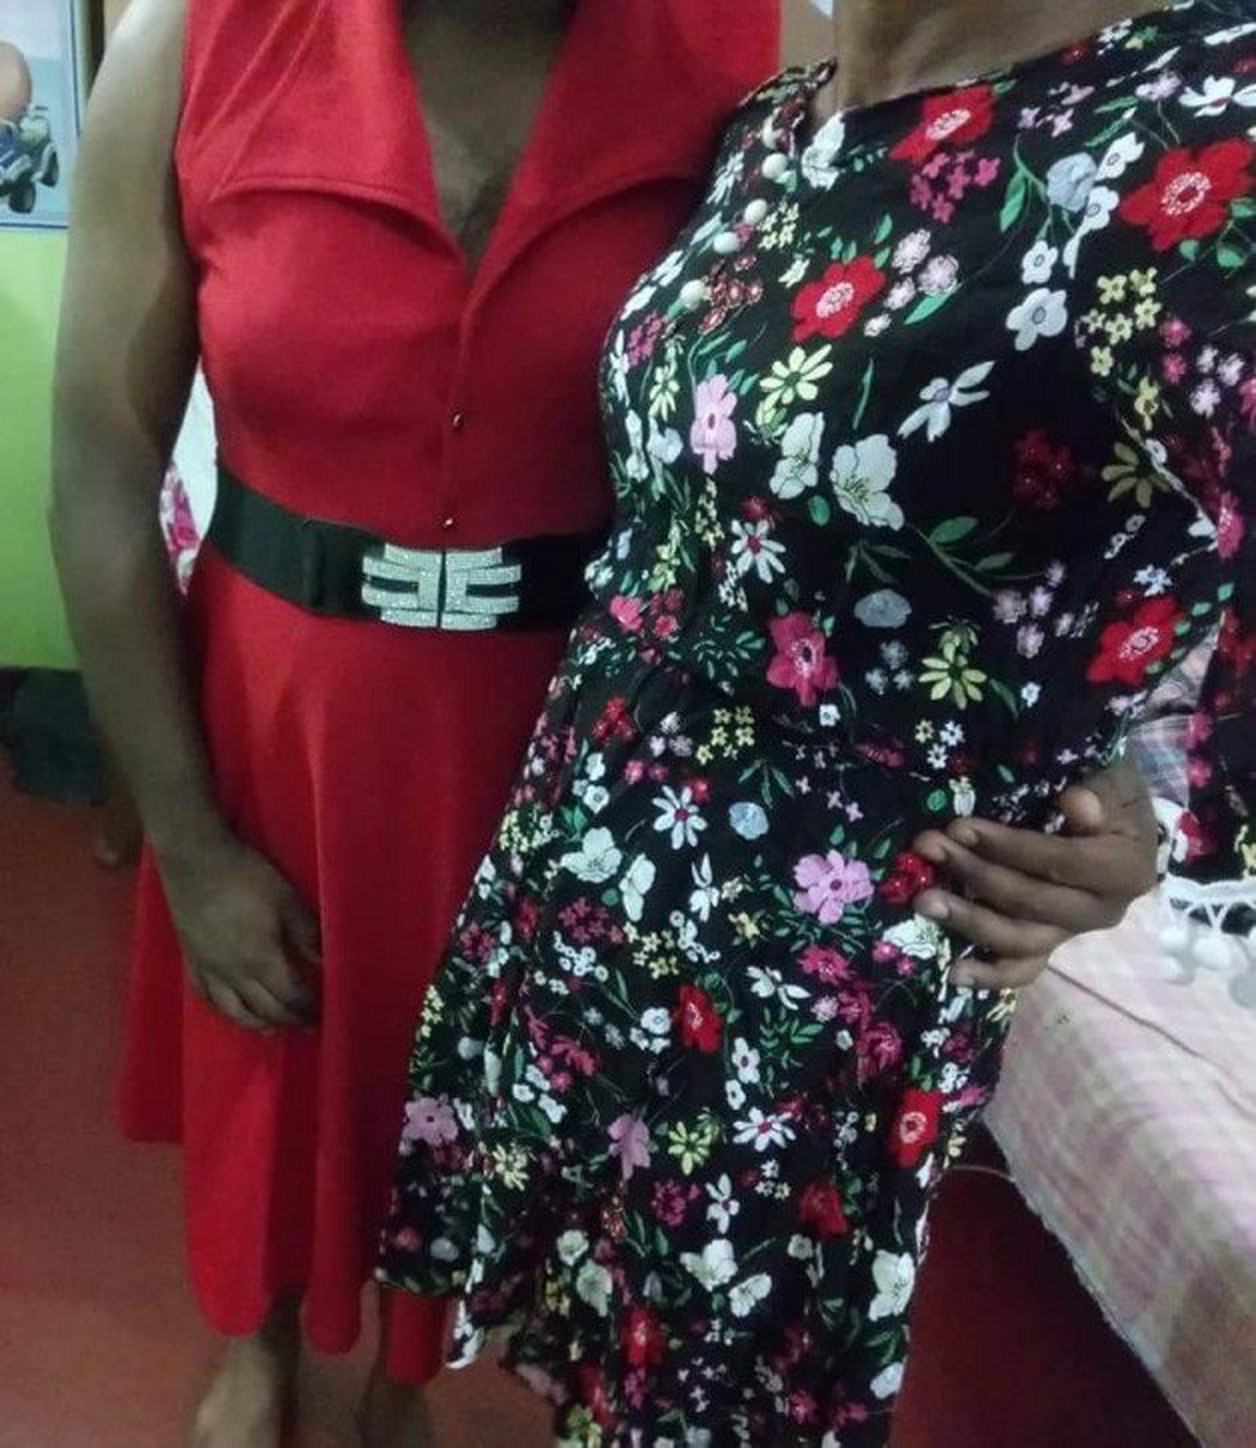 Watch the Photo by LGBTSL with the username @LGBTSL, posted on March 30, 2021. The post is about the topic Ceylon Crossdressers. and the text says 'Sri Lankan Crossdresser couple 

#Lanka_CD   #Crossdressers'